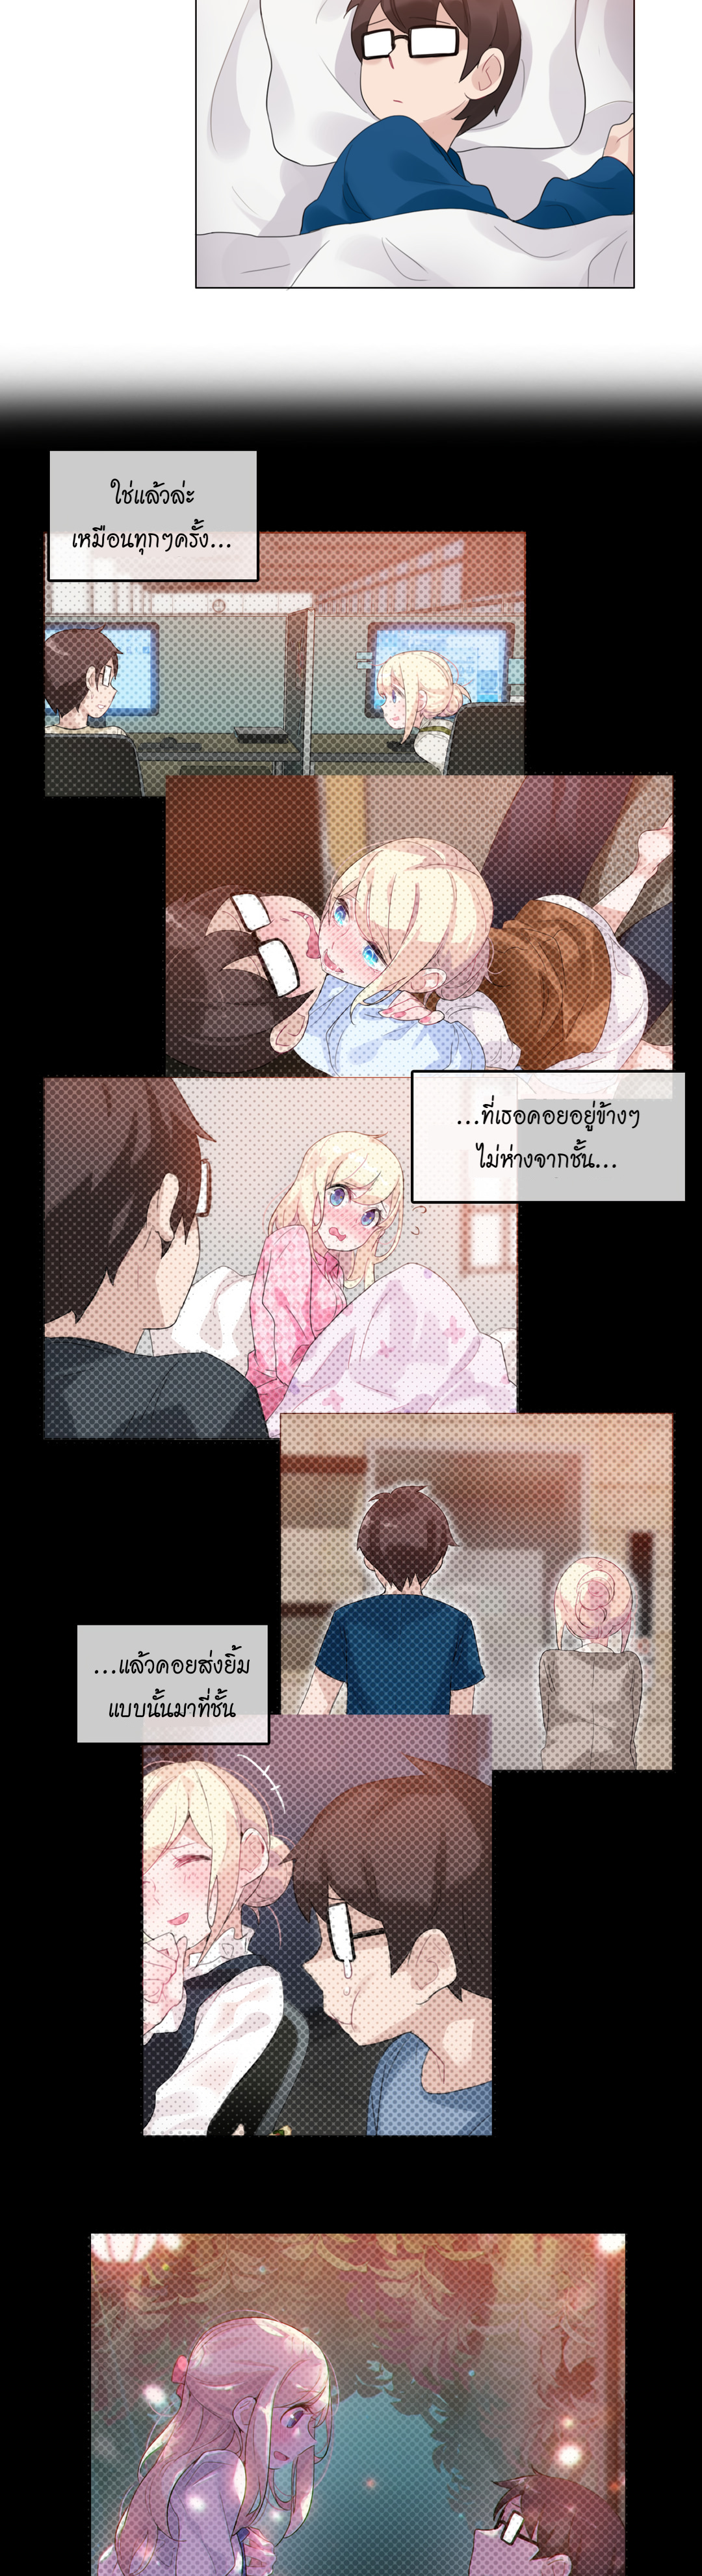 A Pervert’s Daily Life52 (17)